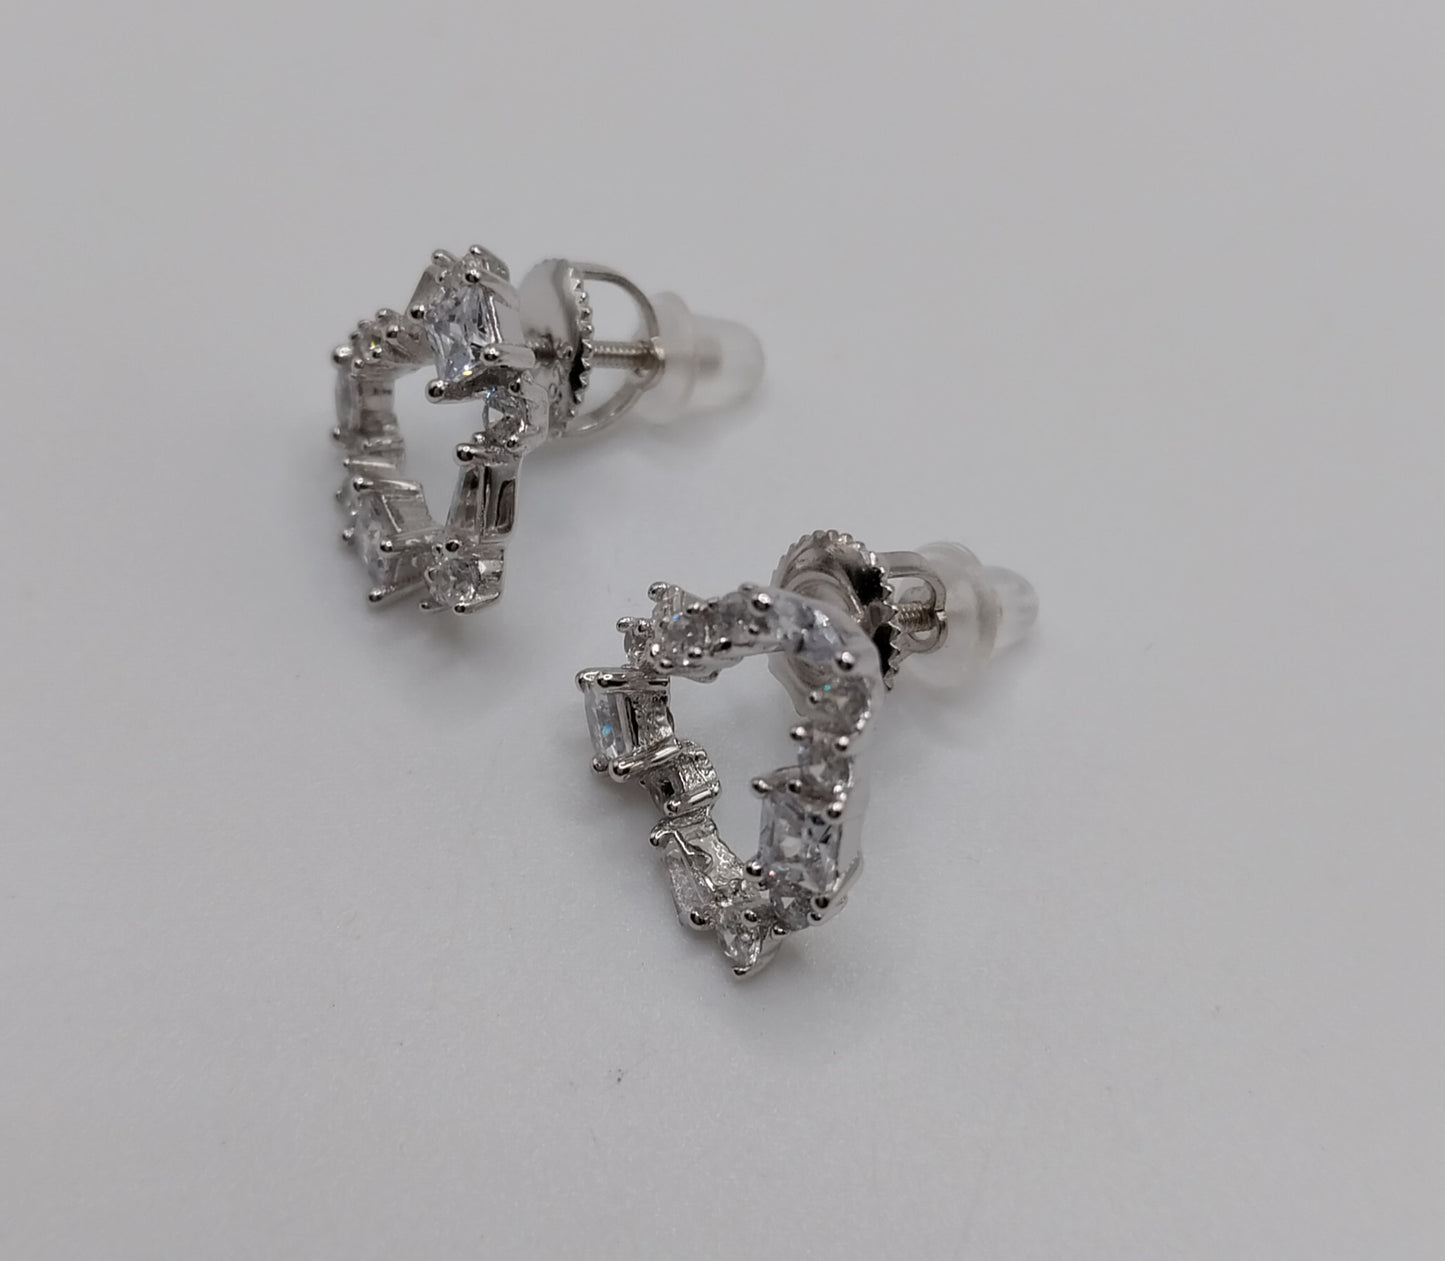 Heart Stud Earrings with White Cubic Zirconia Stones